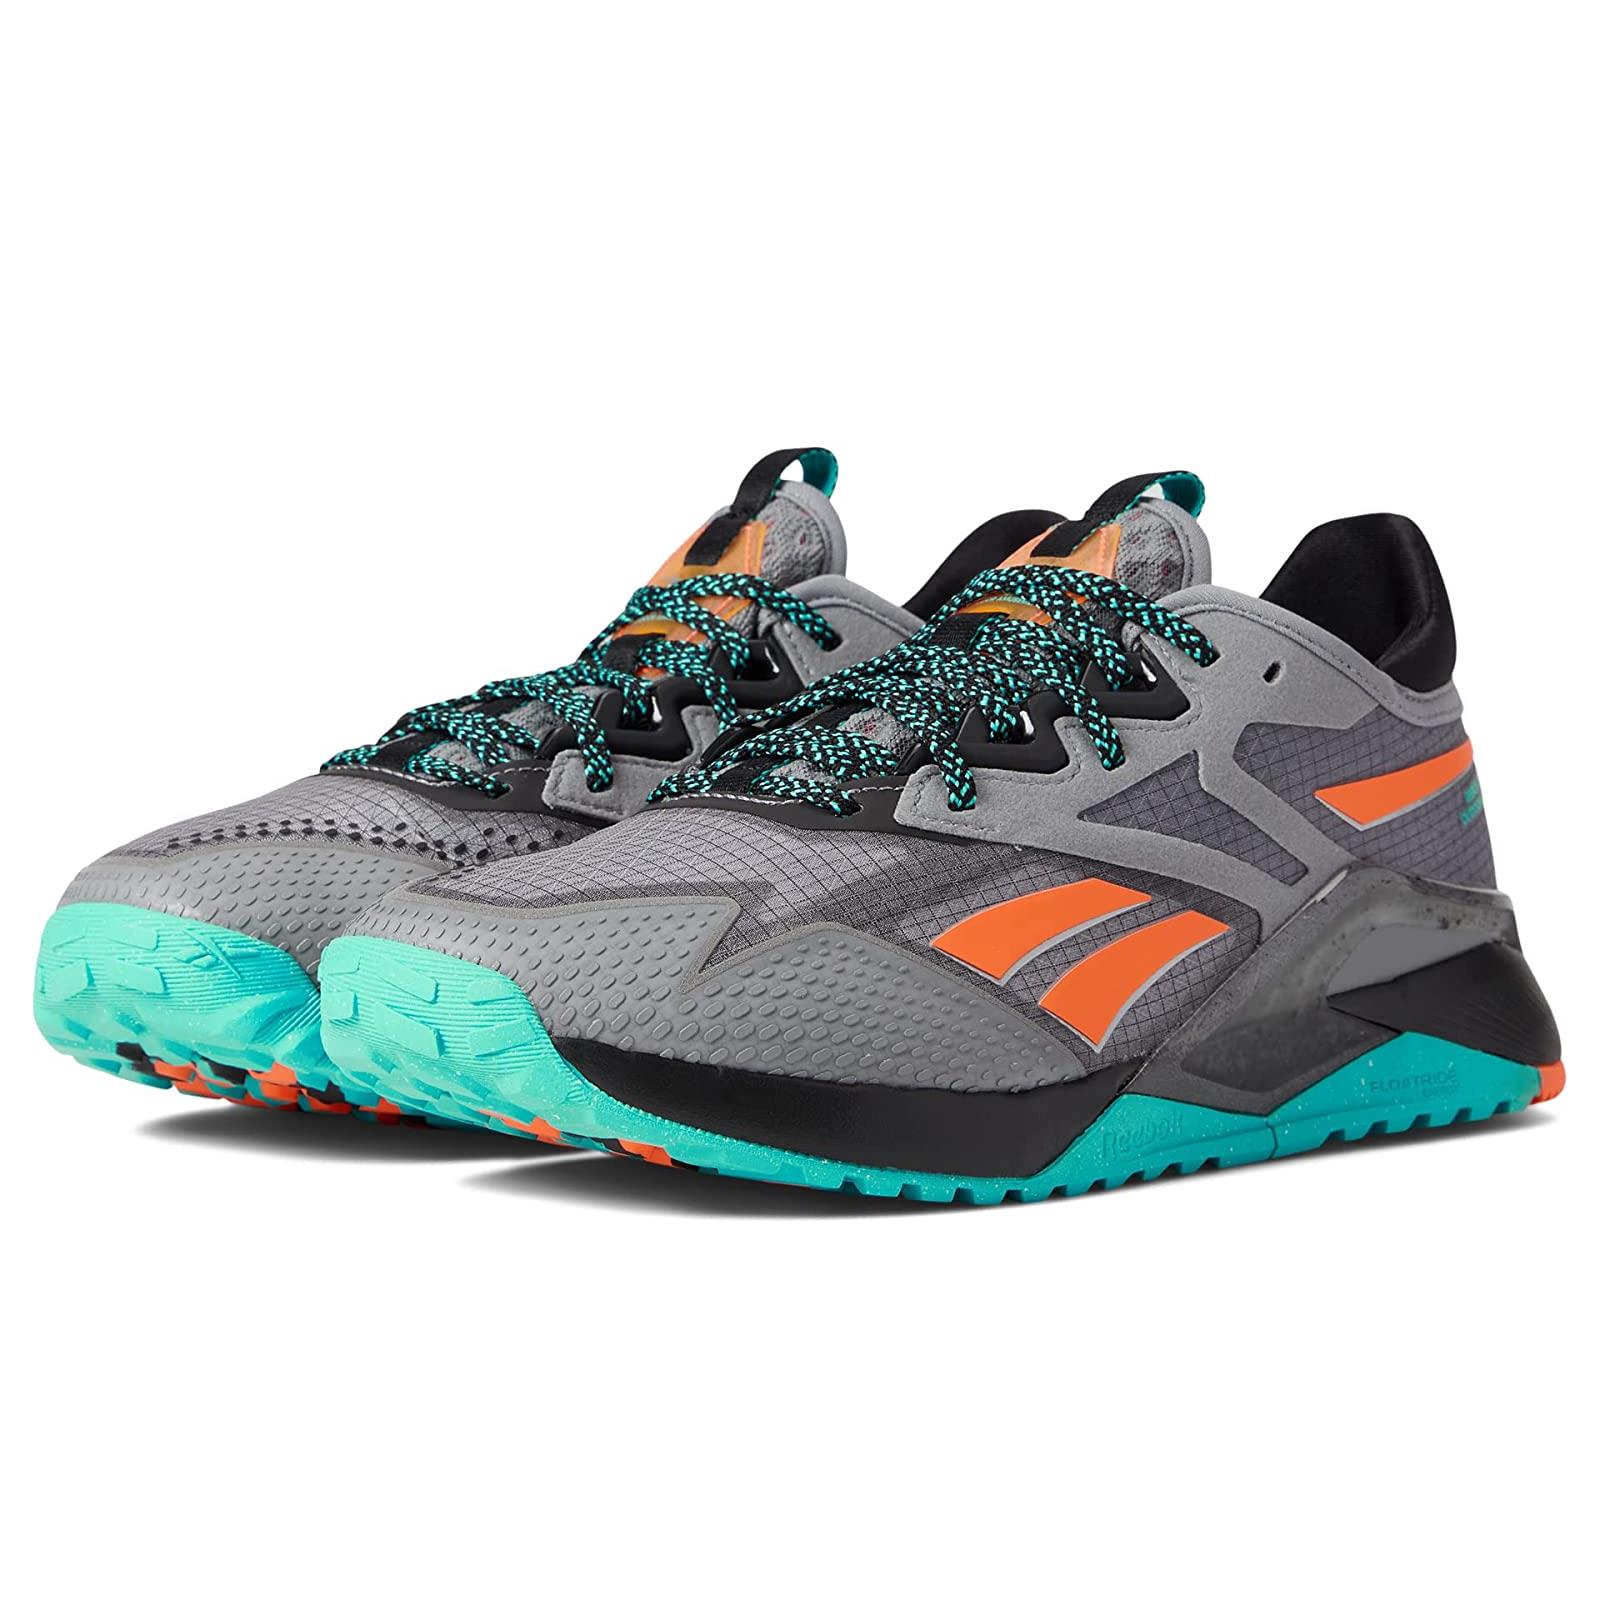 Woman`s Sneakers Athletic Shoes Reebok Nano X2 TR Adventure Pure Grey/Black/Classic Teal